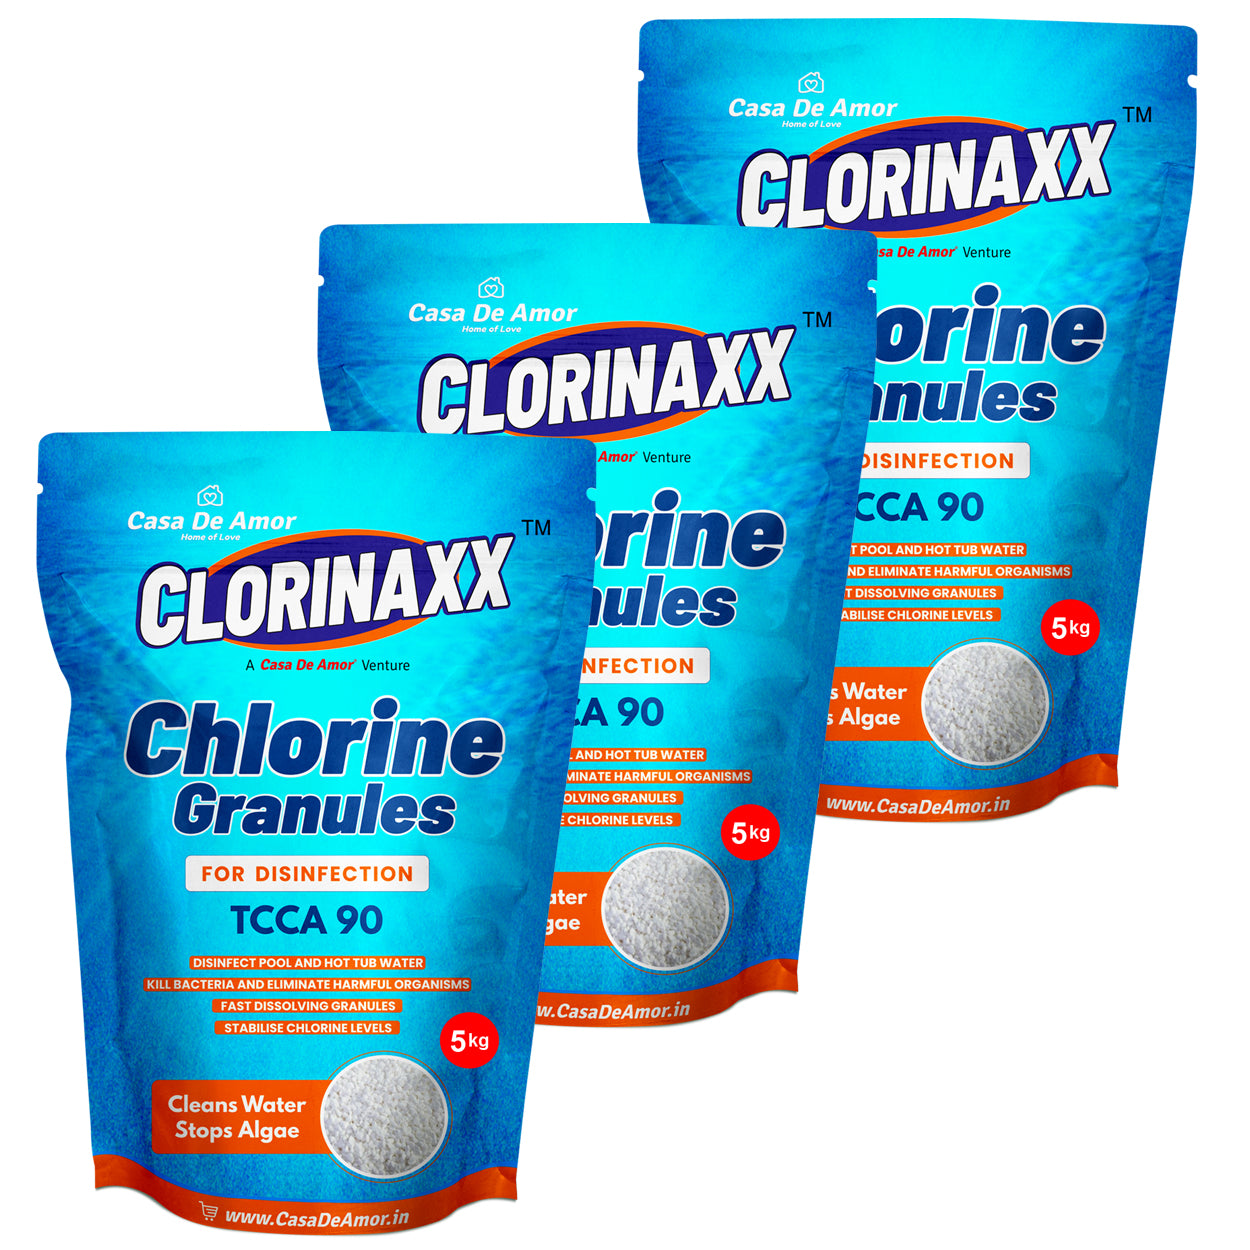 Casa De Amor Clorinaxx Swimming Pool Water Purifier Chlorine TCCA 90 Granules for Disinfection, Cleans Water and Stops Algae